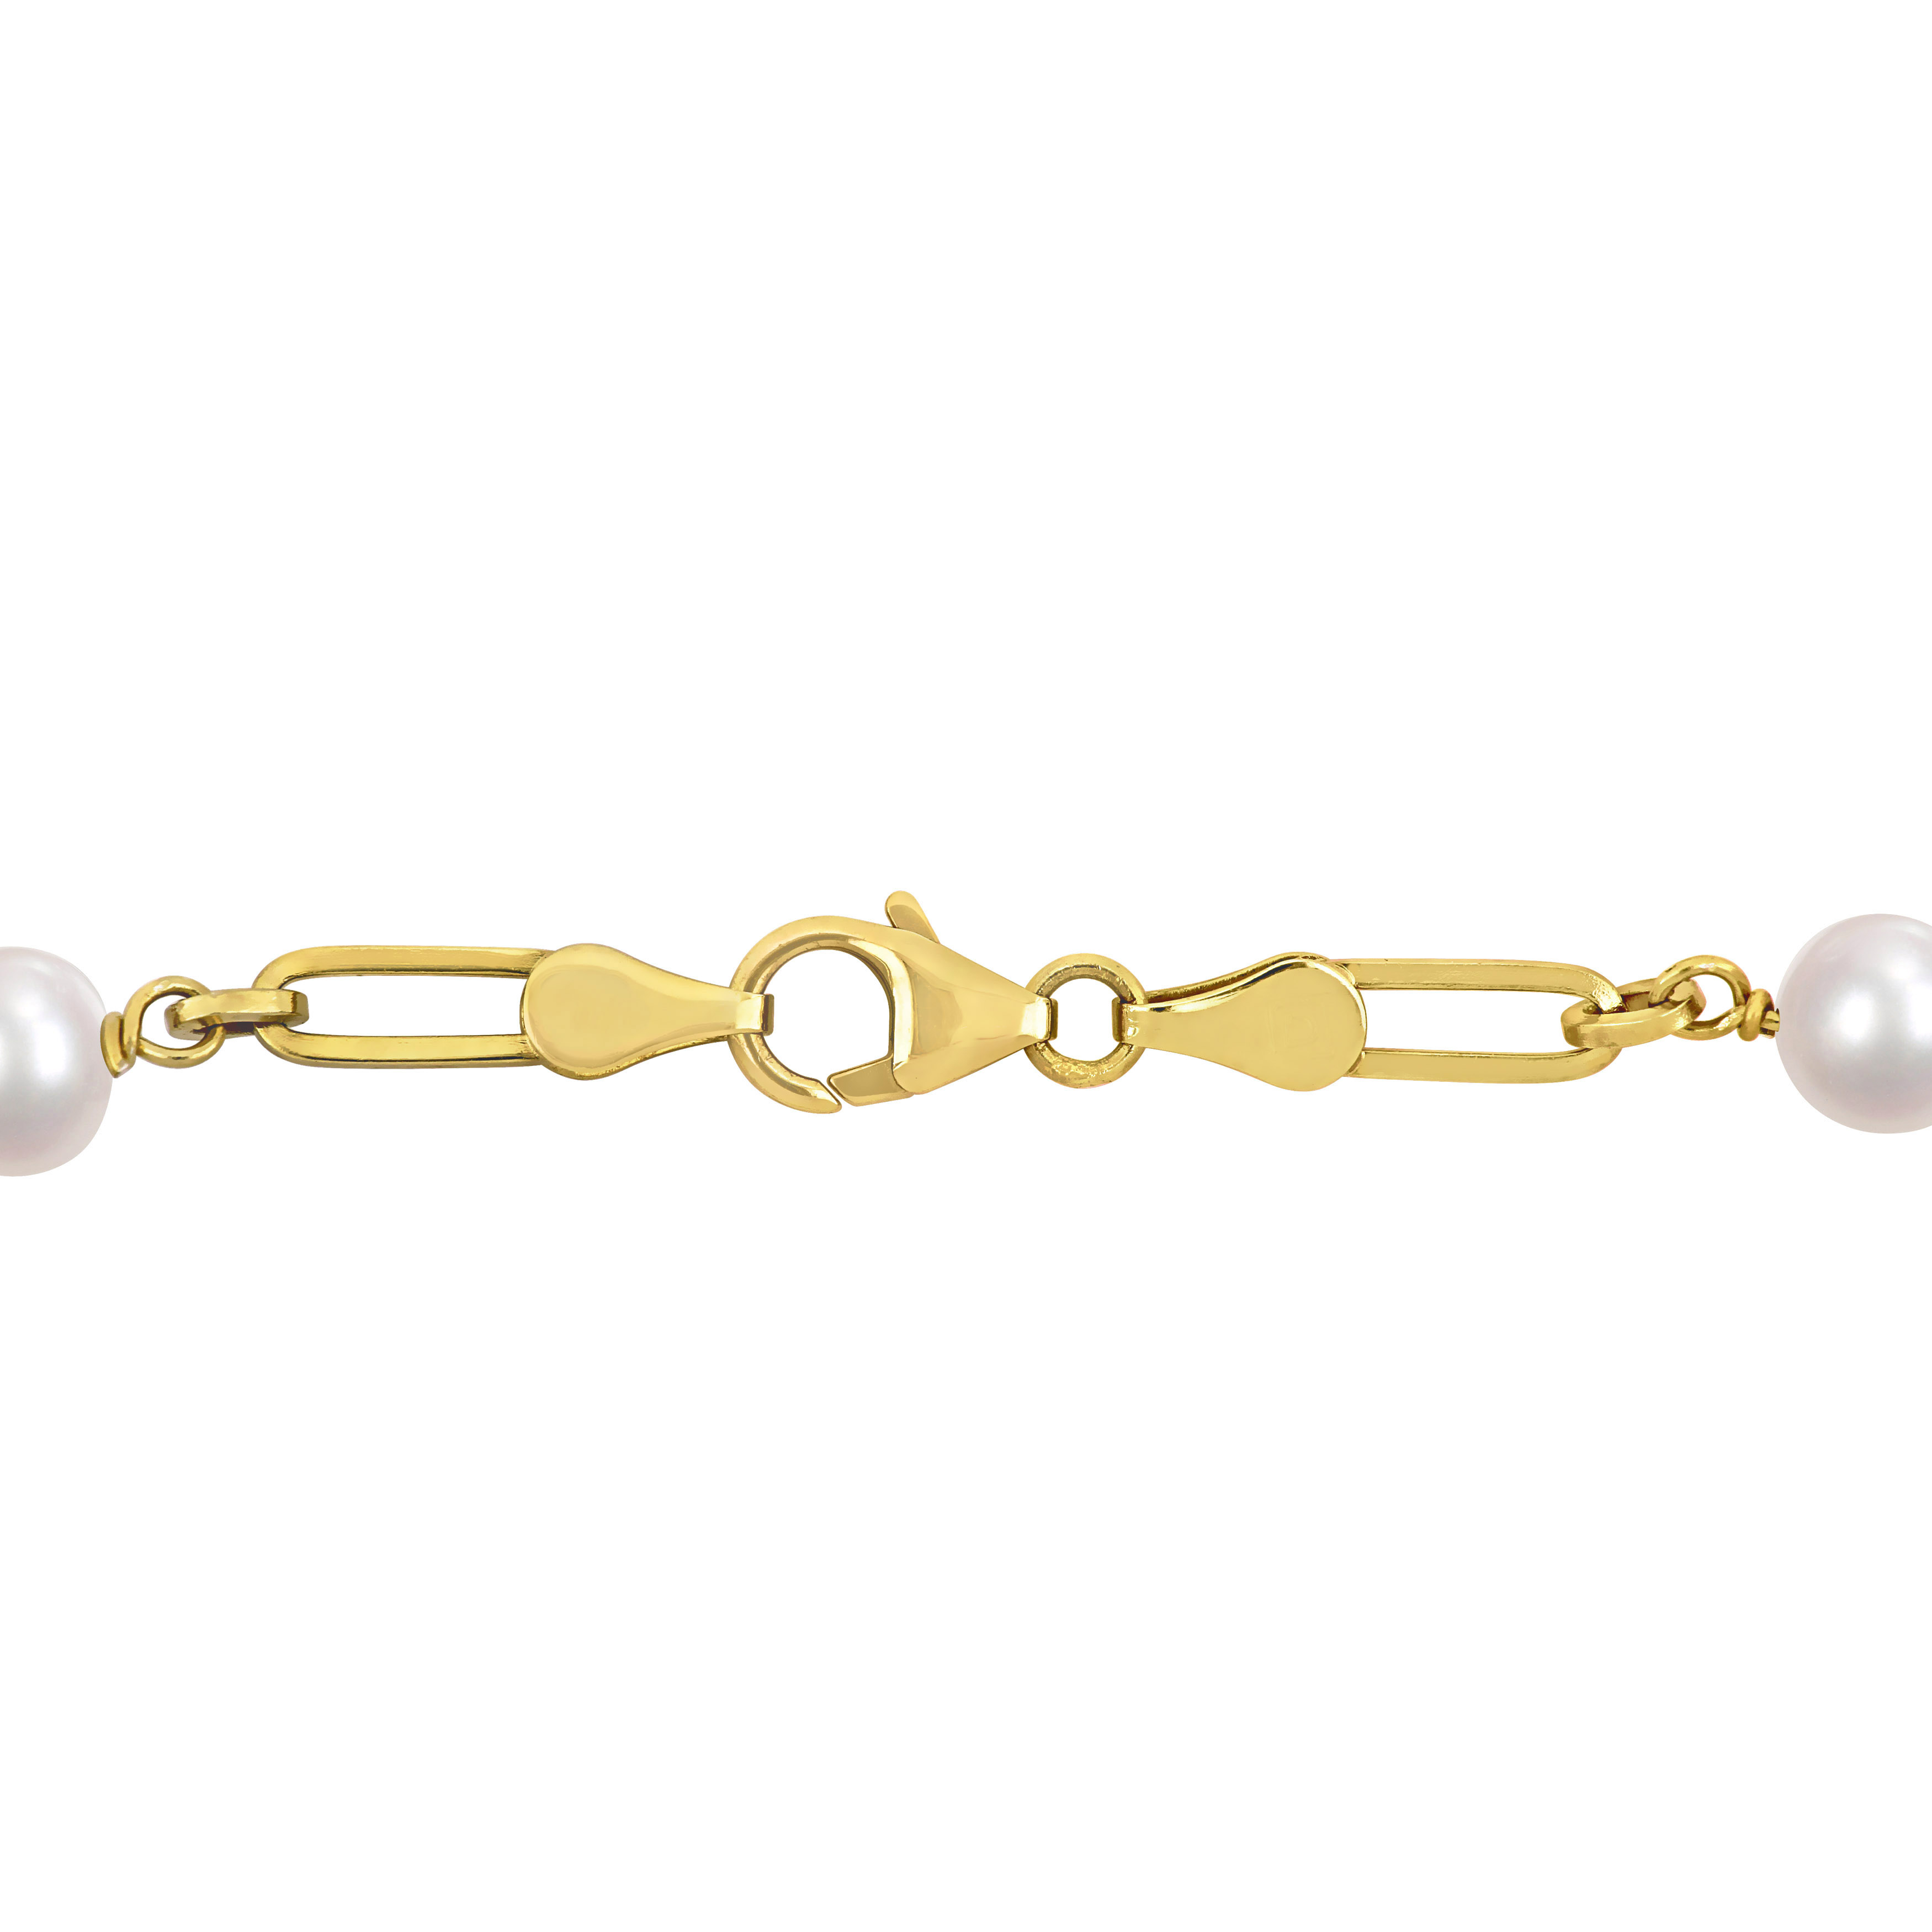 7-7.5mm Cultured Freshwater Pearl Station Link Bracelet in 18K Yellow Gold Plated Sterling Silver